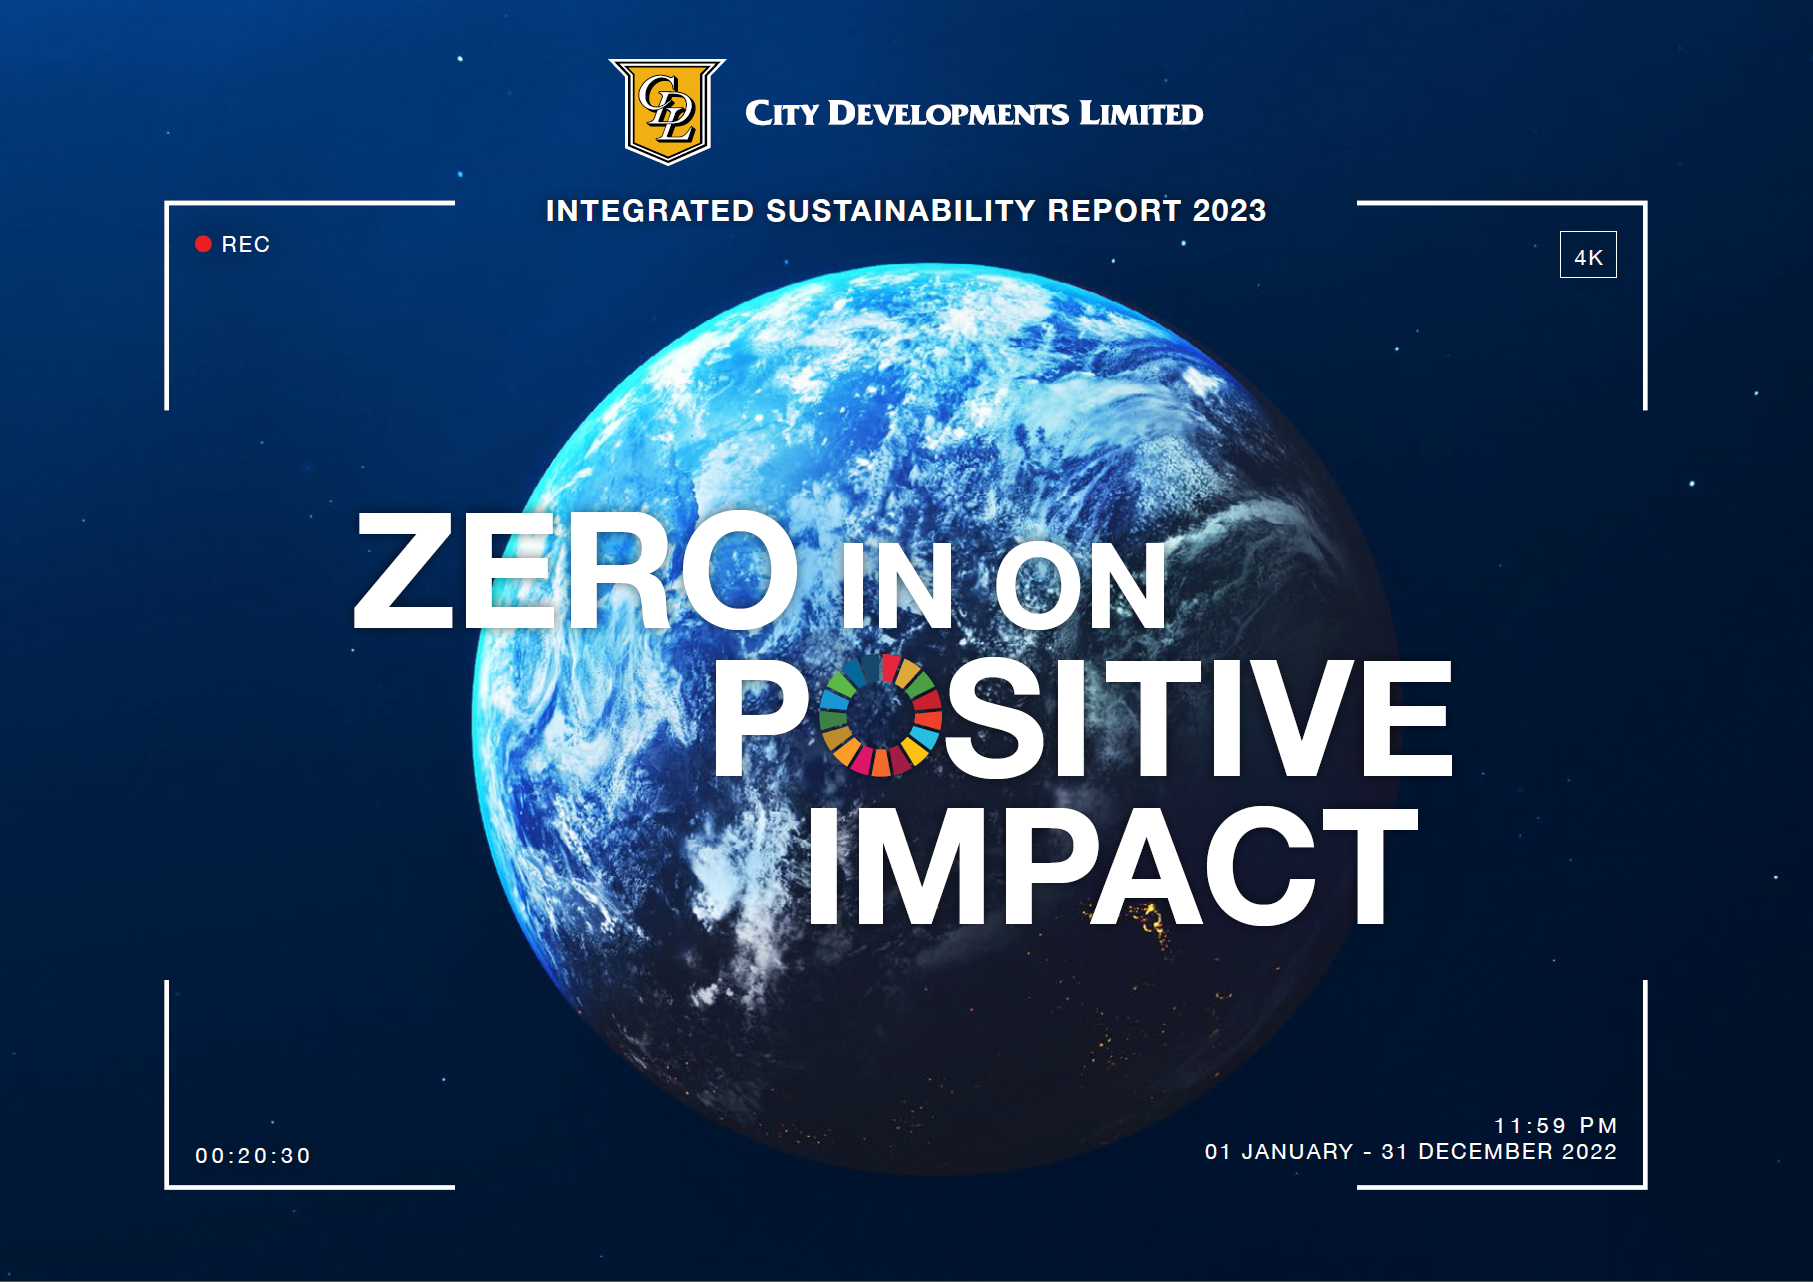 Integrated Sustainability Report 2023 – Zero in on Positive Impact